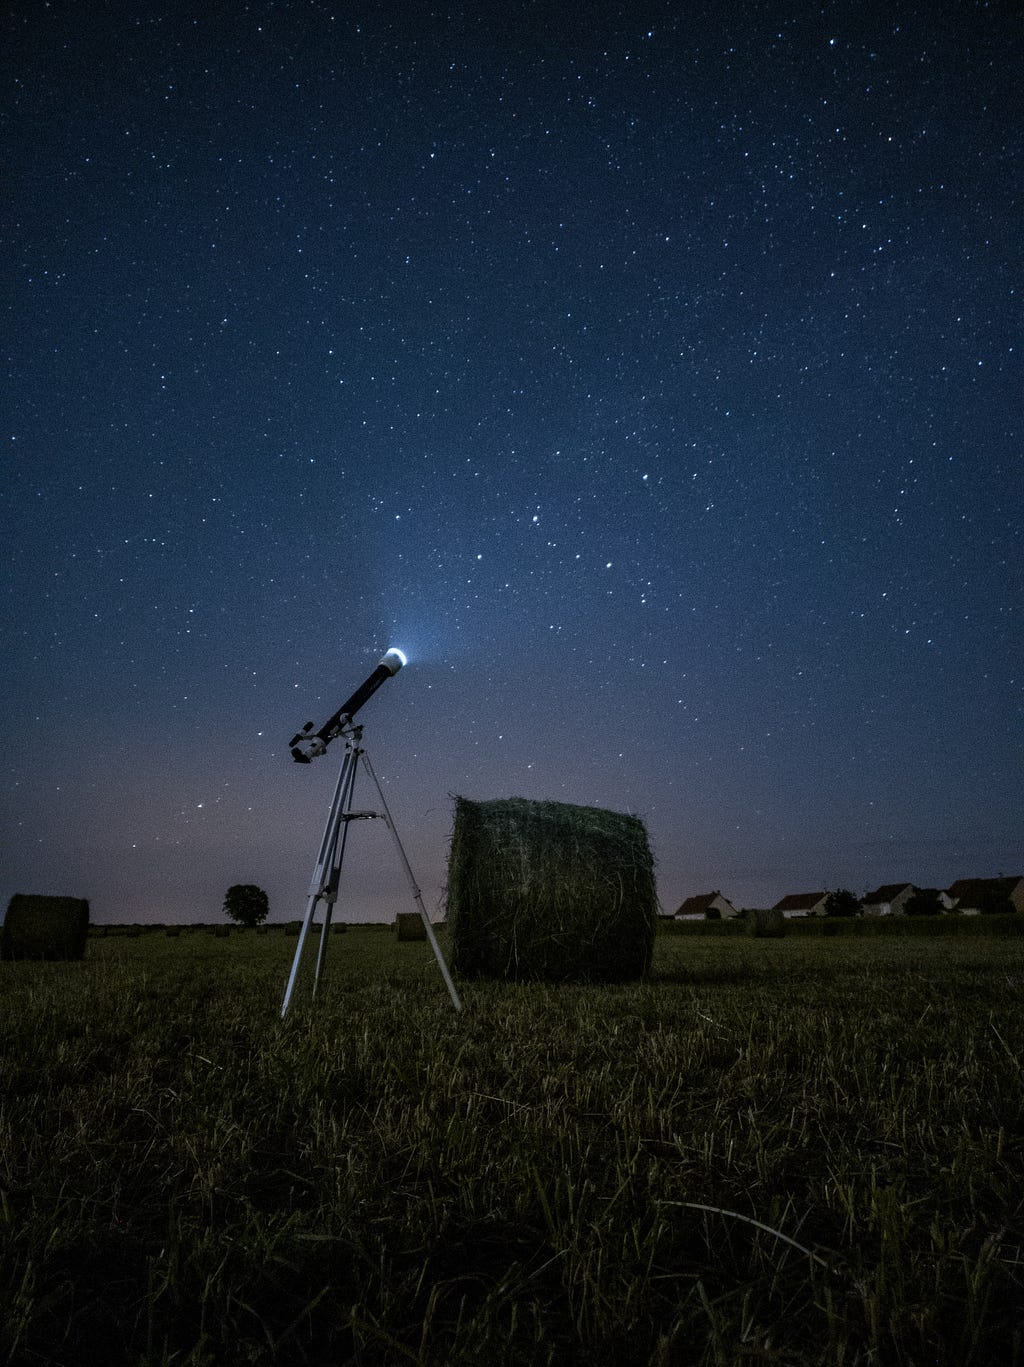 An image of a telescope in a field of hay bales at night. Photo by Simon Delalande on Unsplash.